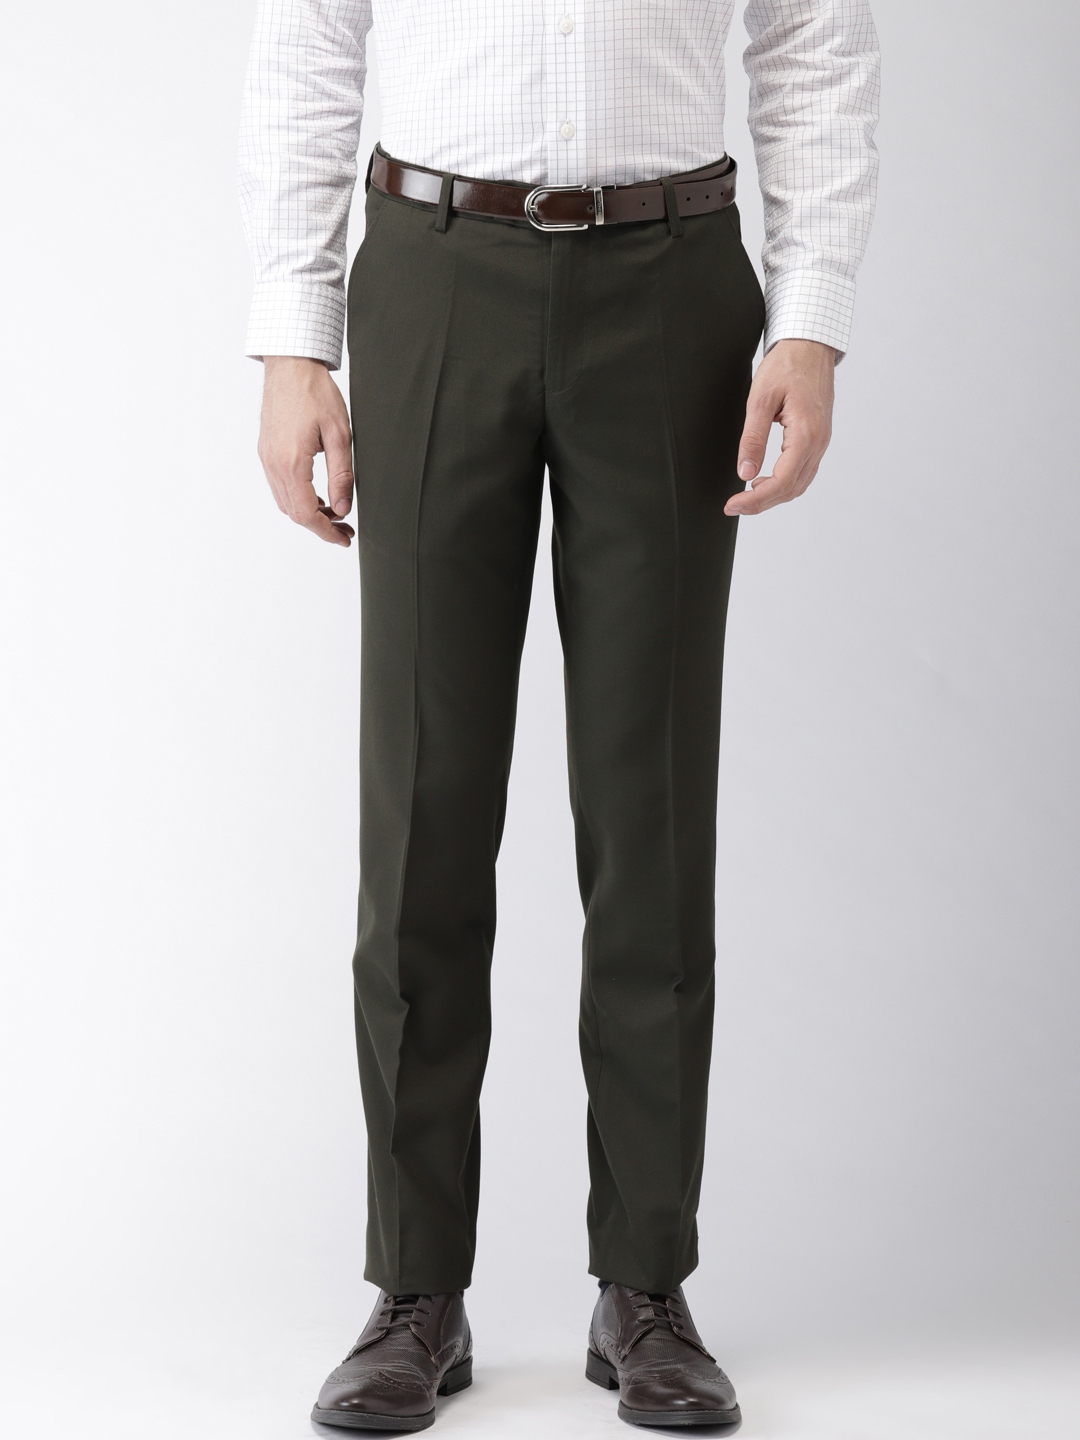 Formal Trousers  Buy Formal Trousers Online at Best Price in India  Myntra